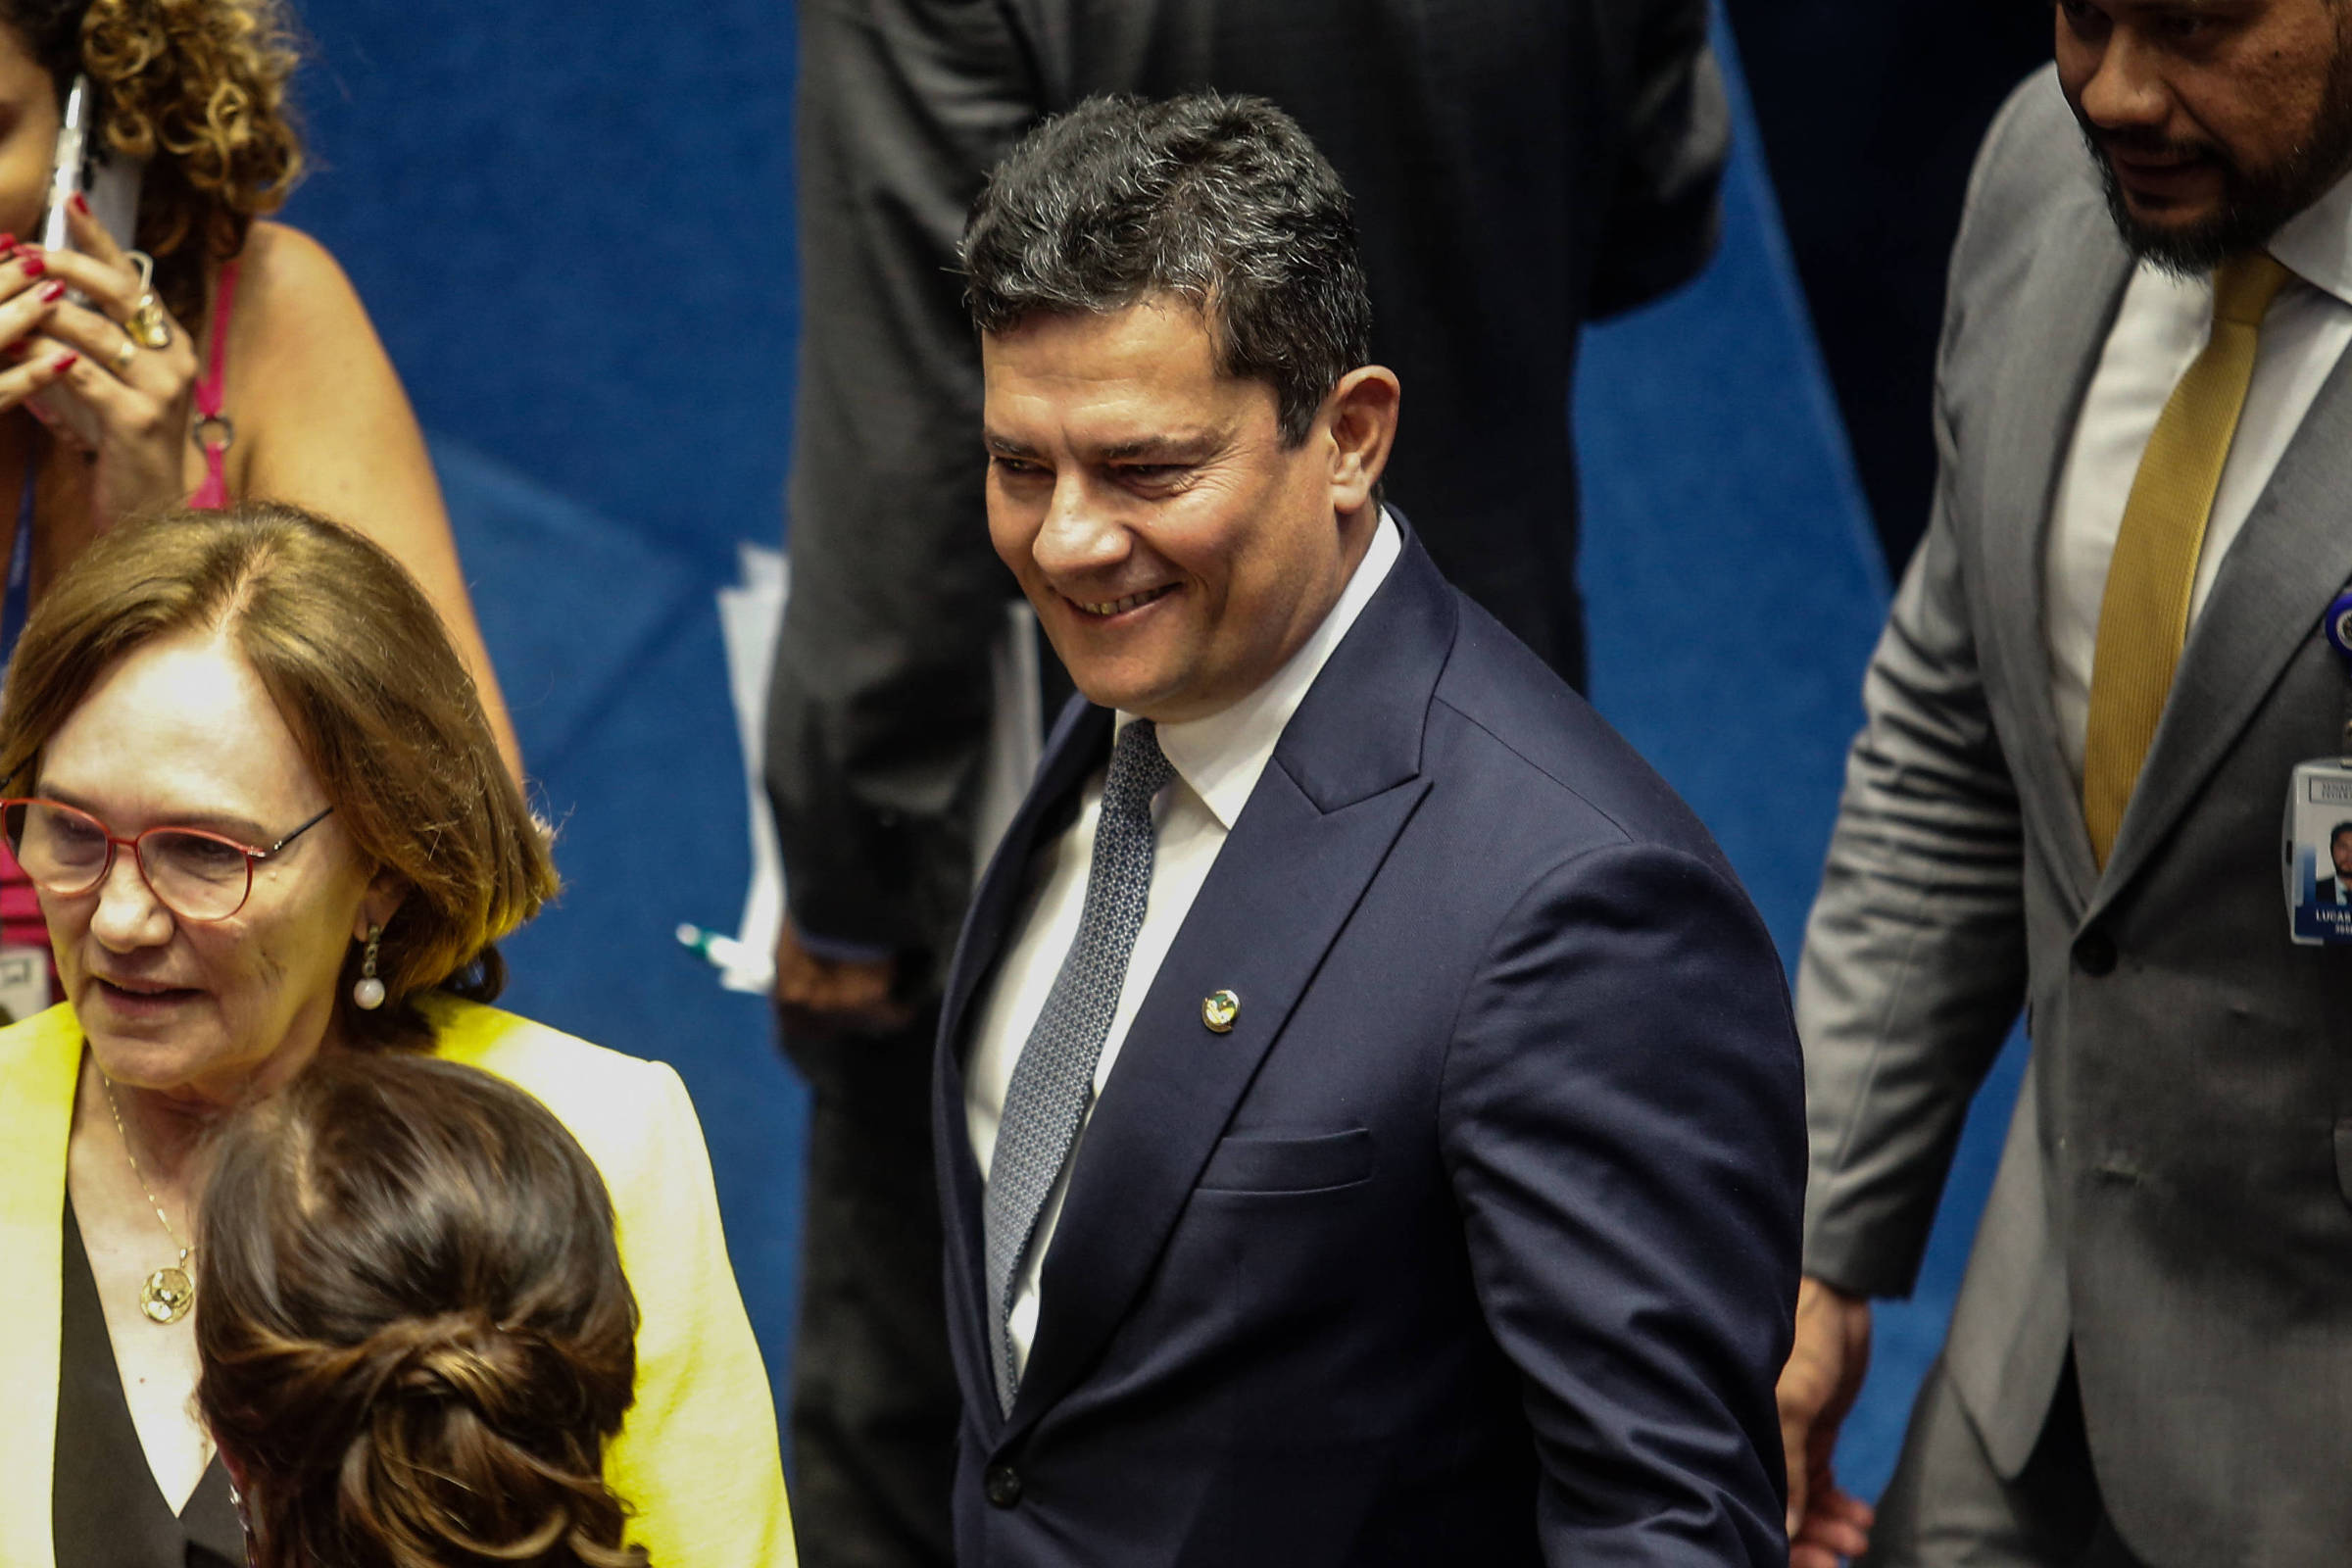 Moro gets support in the Senate to try to resume prison project in 2nd instance – 02/15/2023 – Power